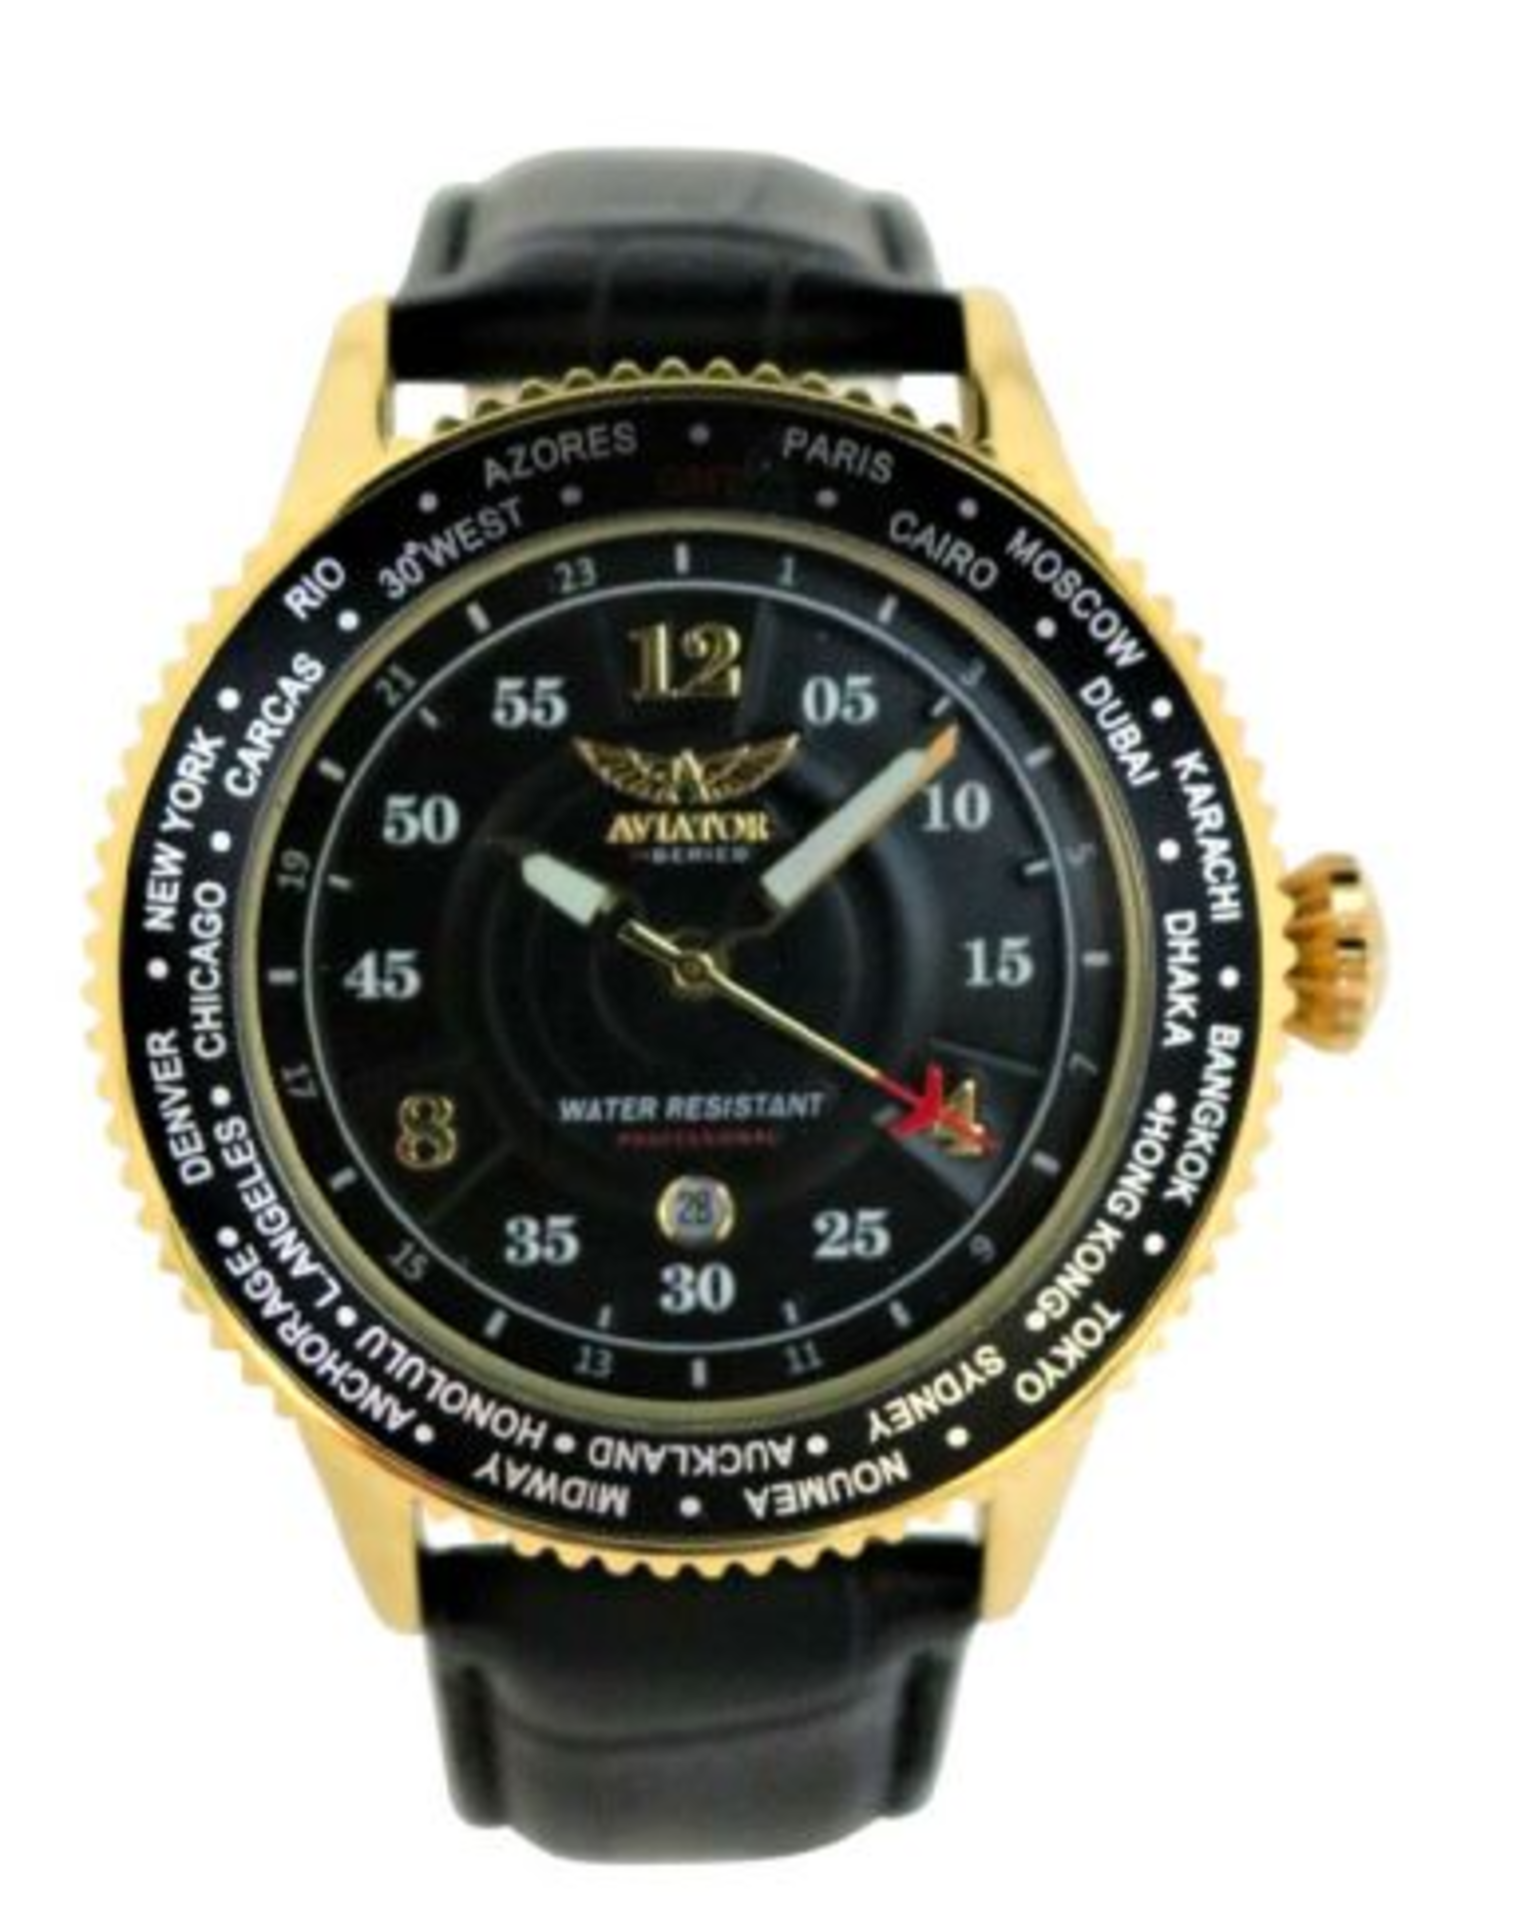 Aviator Men's Watch F-Series AVW8481G441 - has a stainless steel case with a leather strap. The size - Image 3 of 3